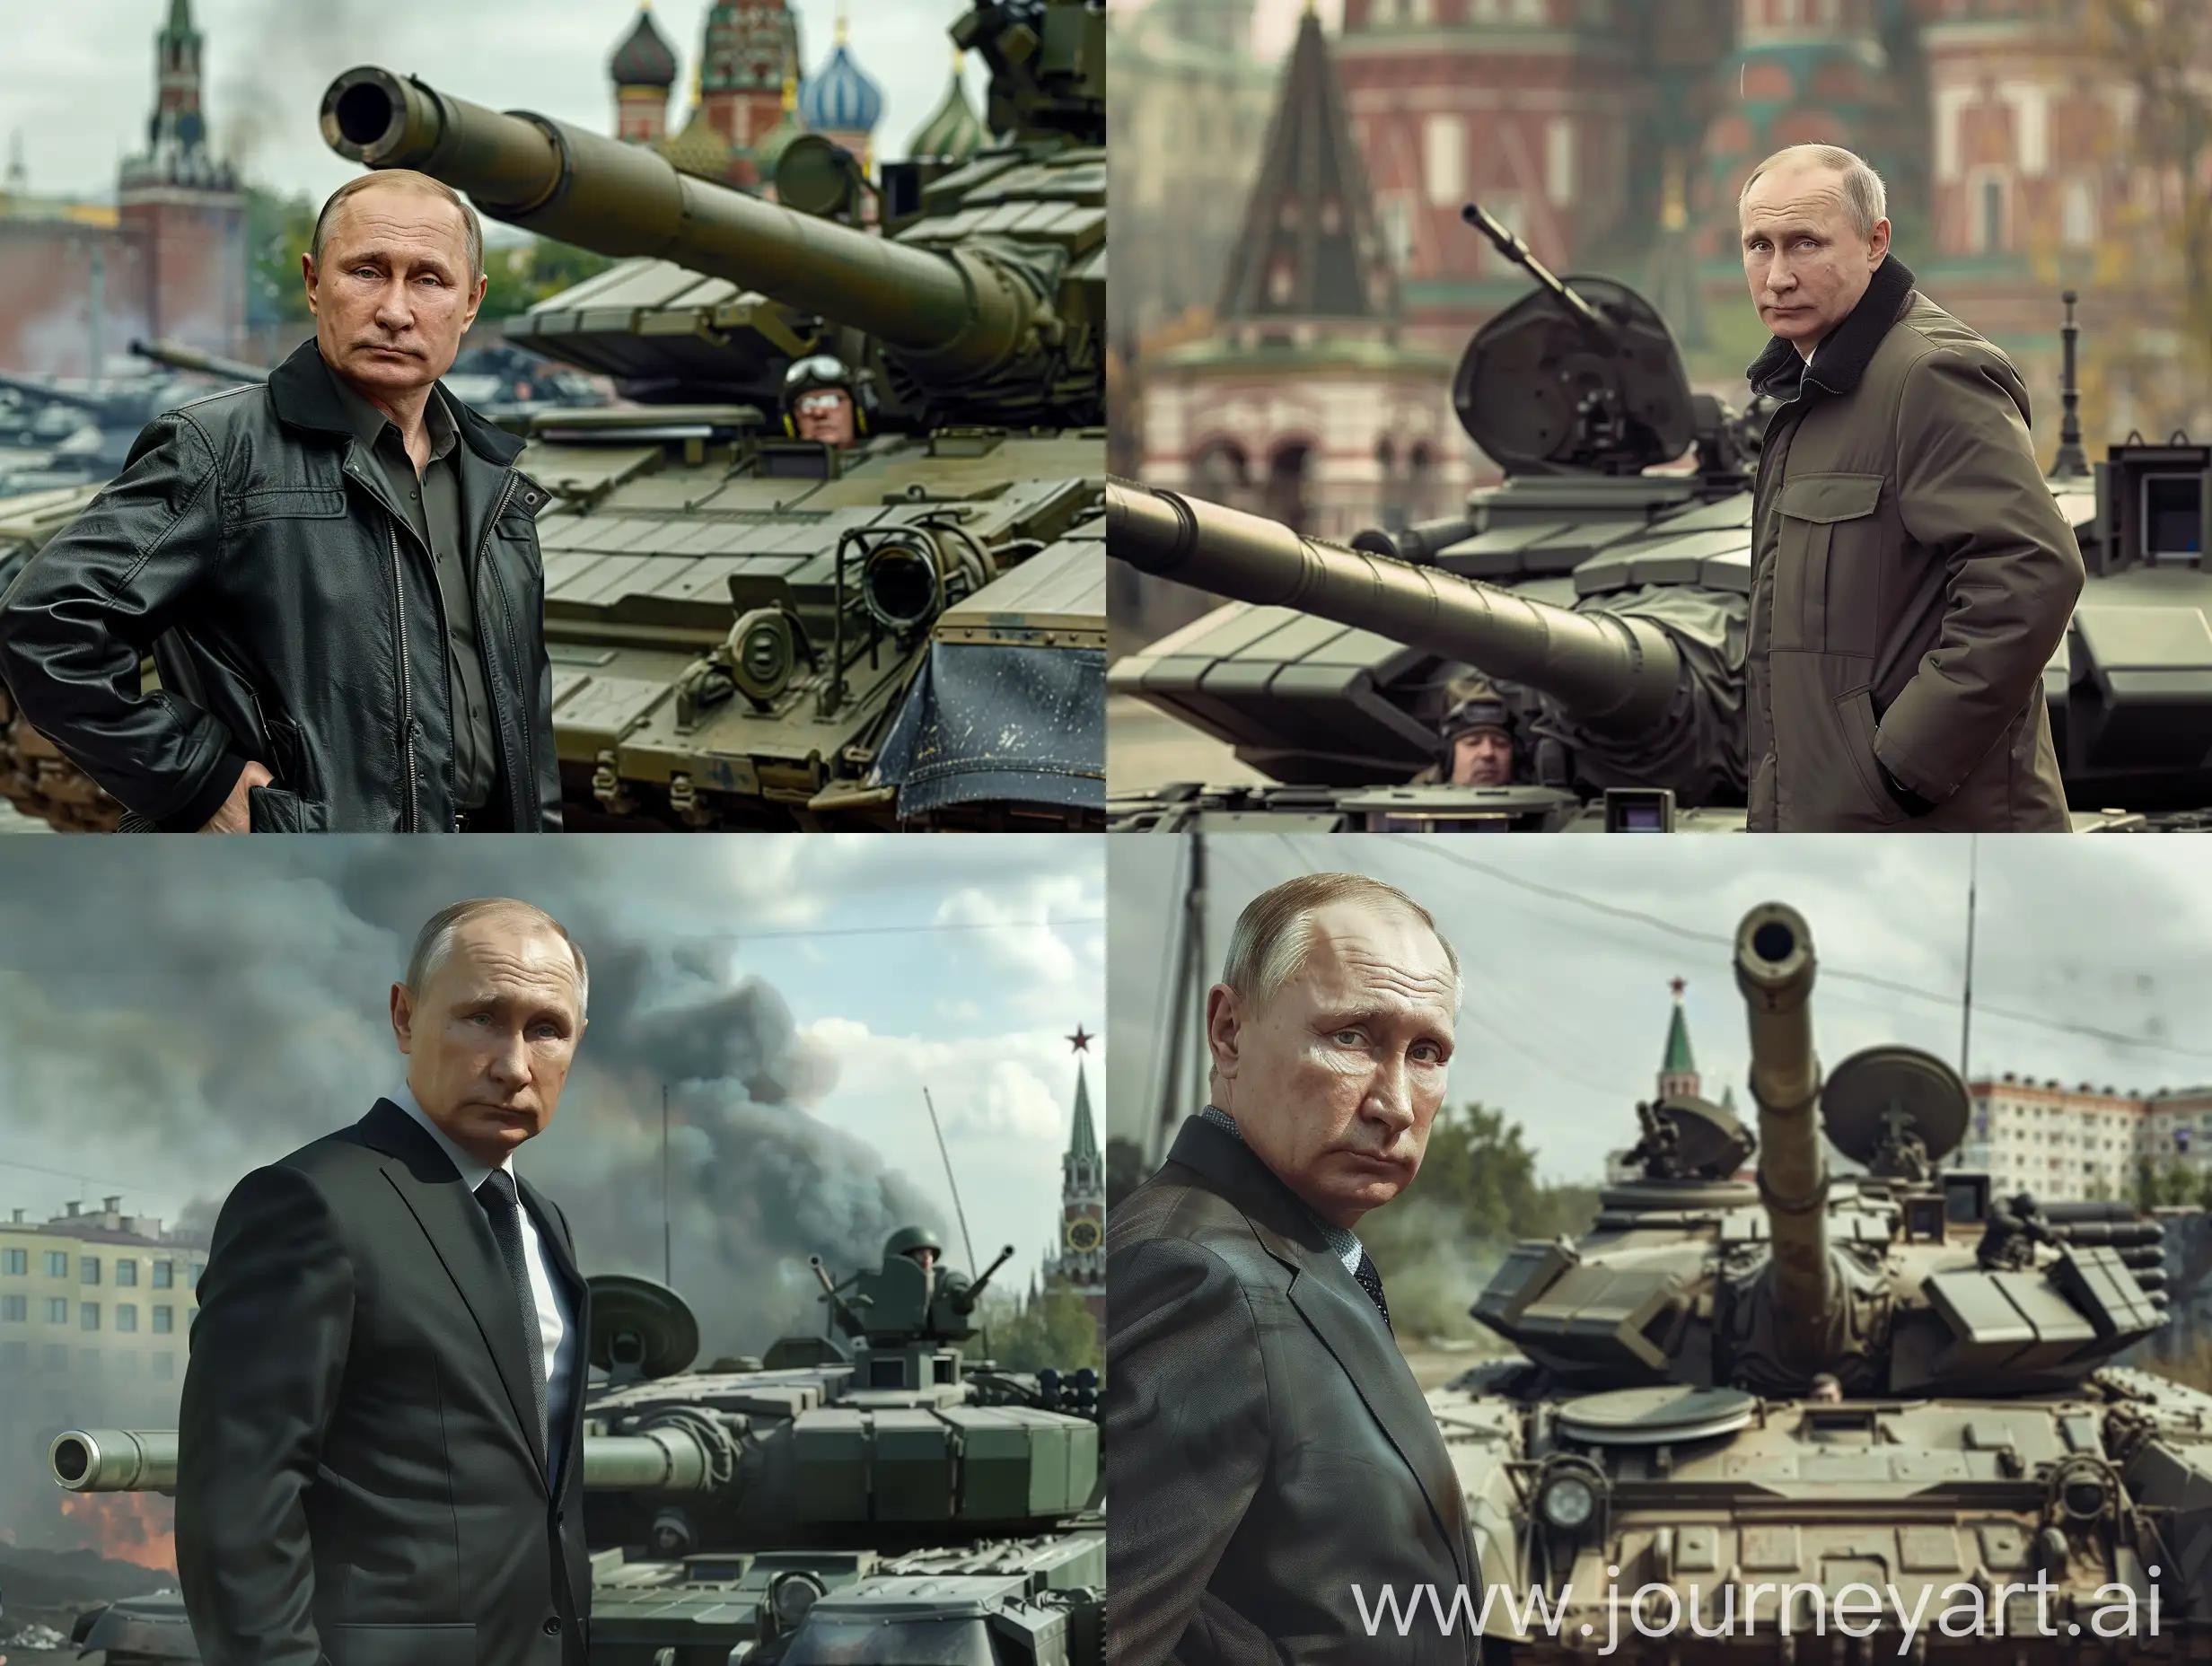 Vladimir-Putin-Standing-Near-Tank-in-Moscow-Realistic-Super-Detailed-Image-in-8K-HDR